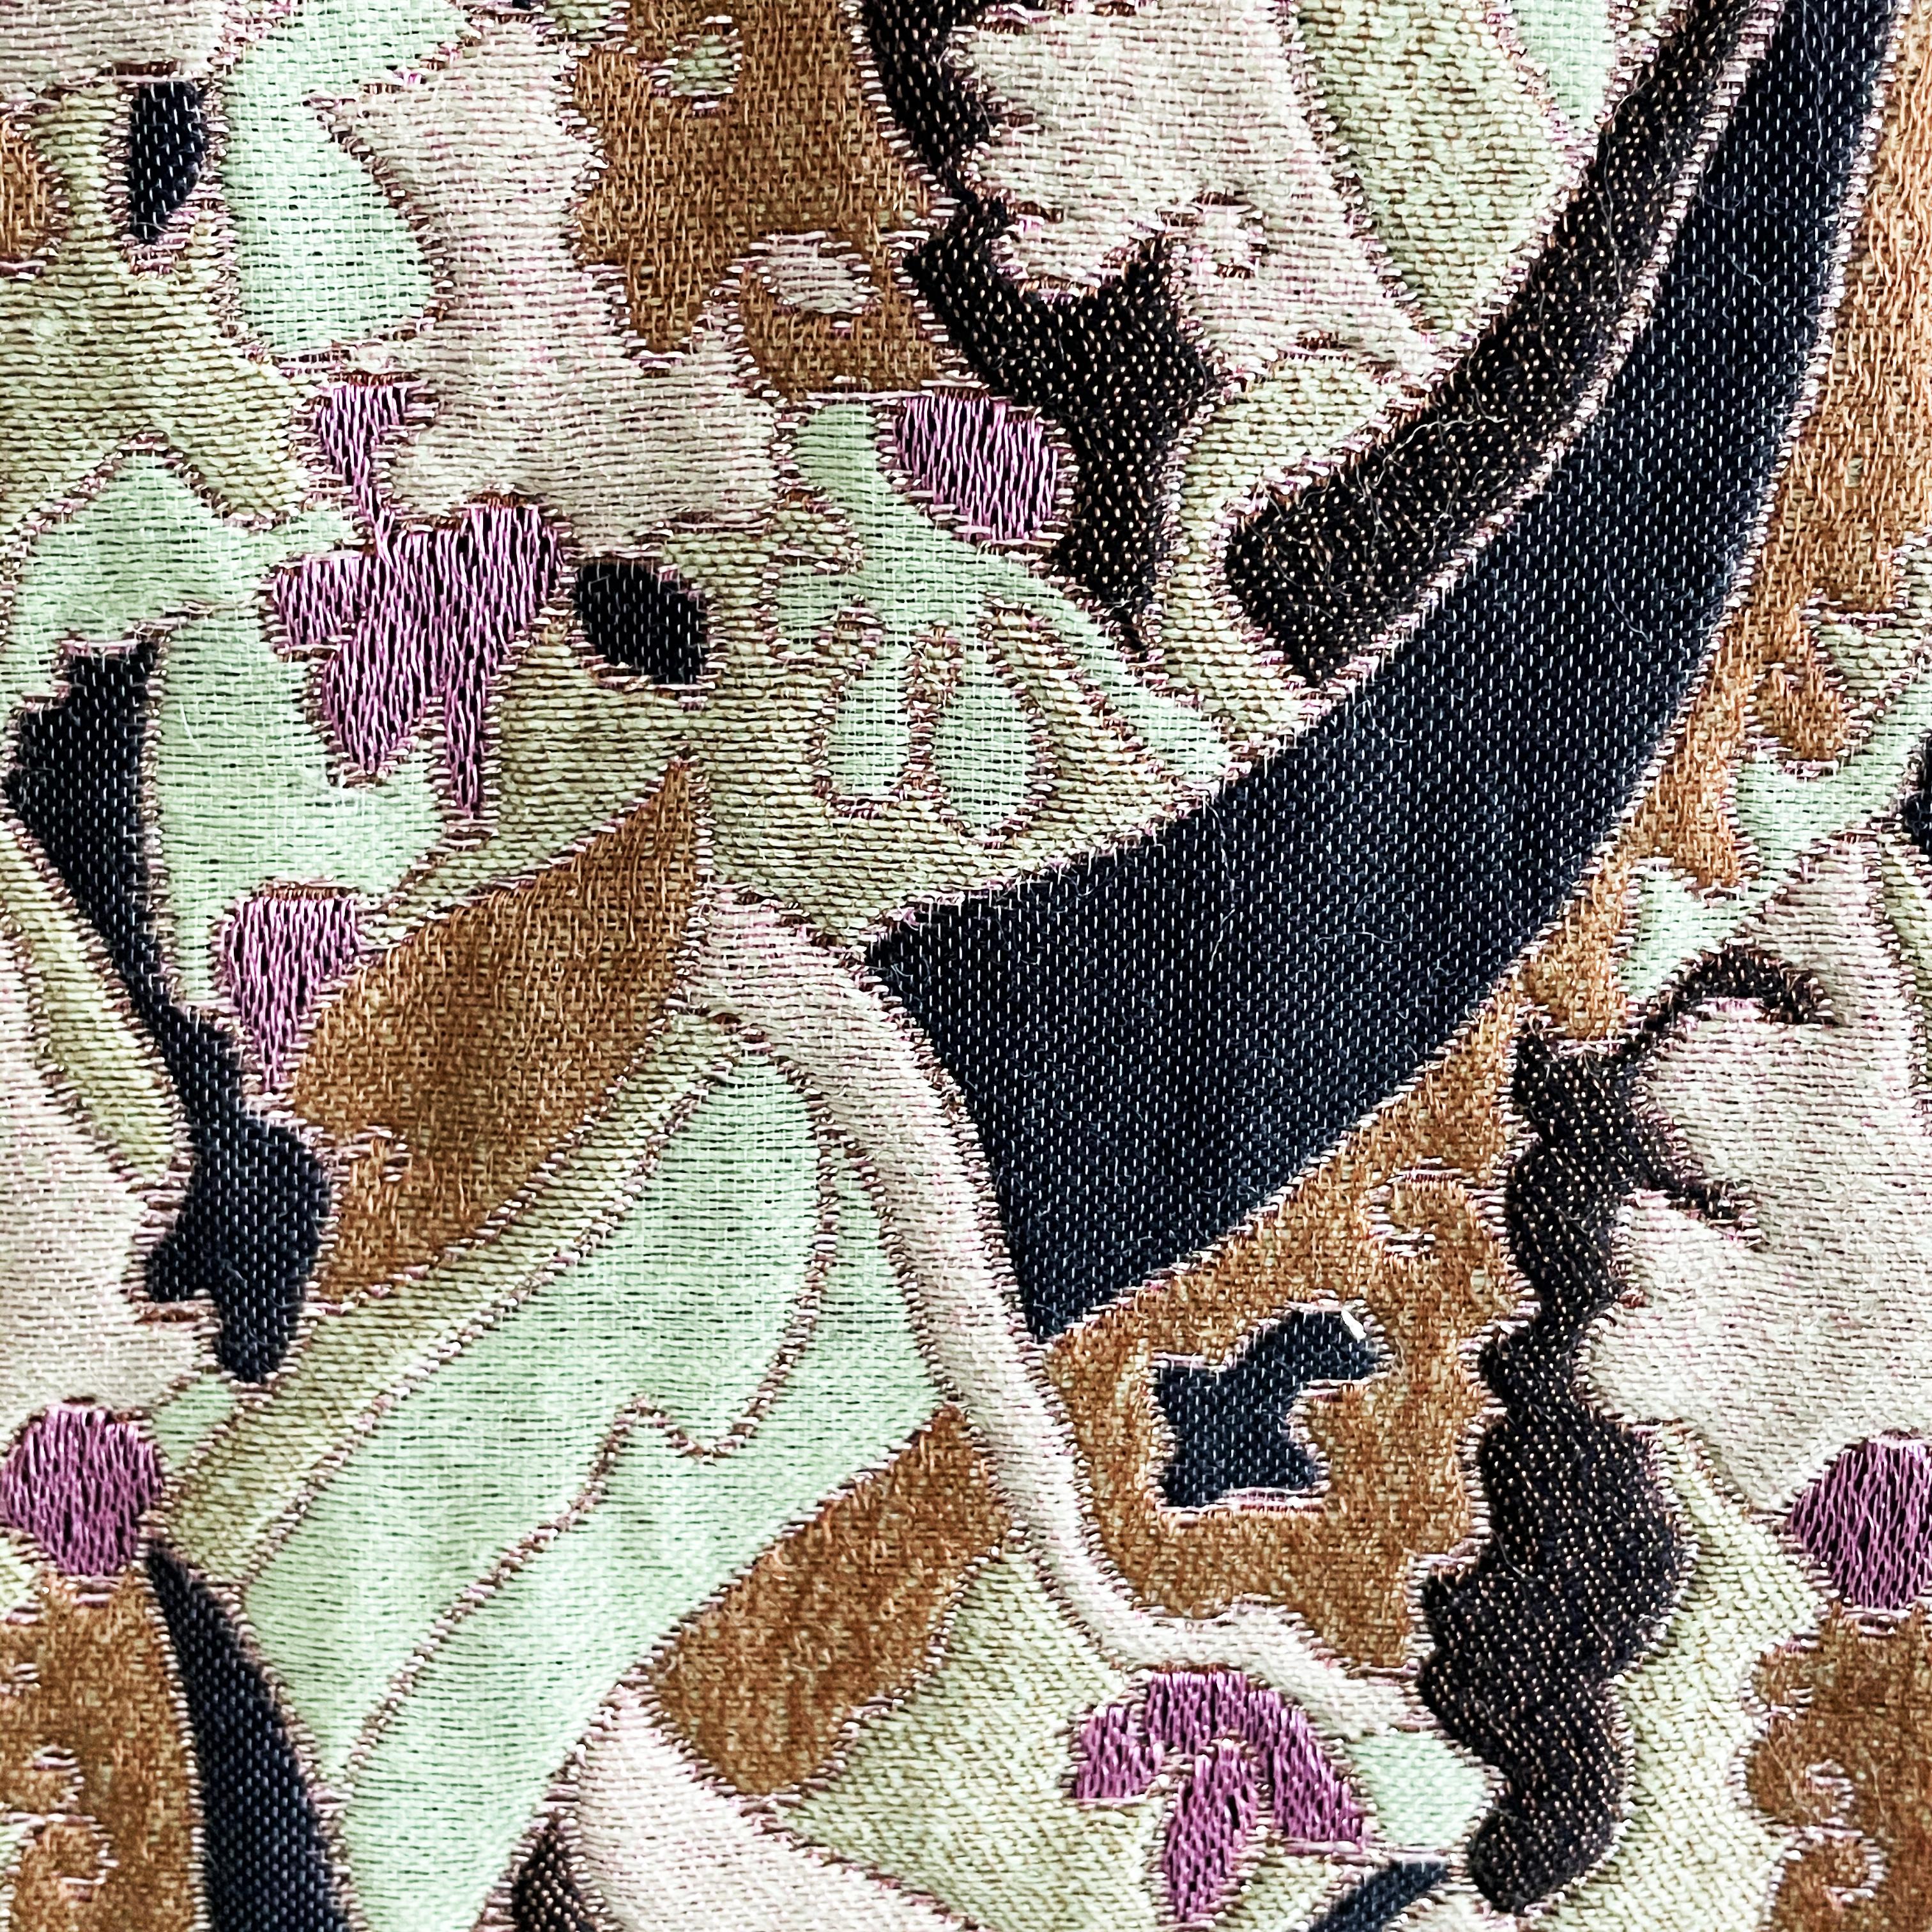 Vintage Brocade Coat or Coat Dress by James Galanos for Amelia Gray Boutique Beverly Hills, likely made in the late 60s. 

Made from an Incredible tapestry brocade in shades of pale green, lavender, brown & charcoal black, it features decorative